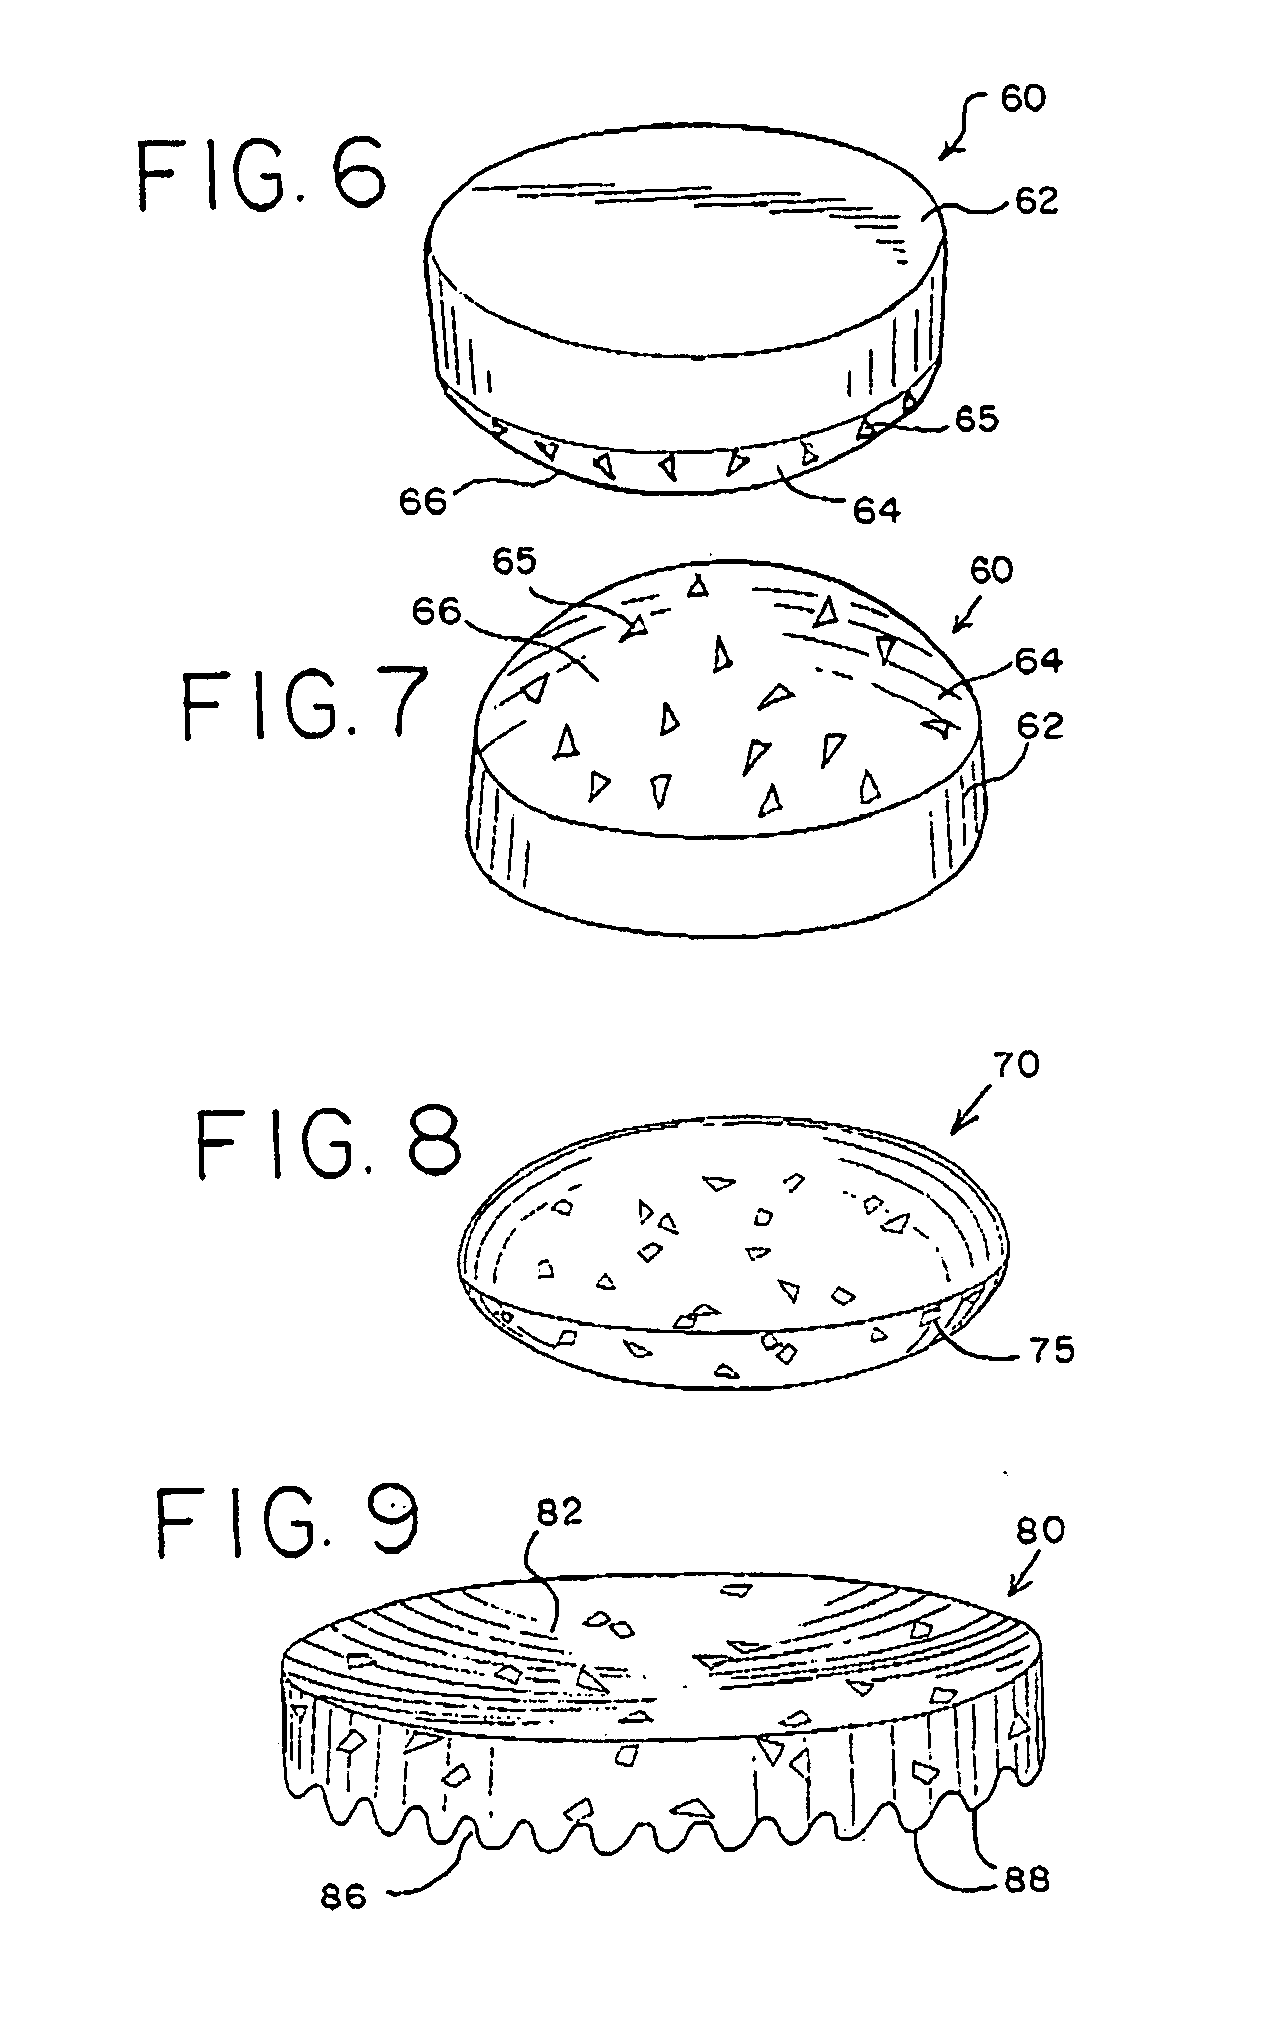 Breath freshening pressed tablets and methods of making and using same